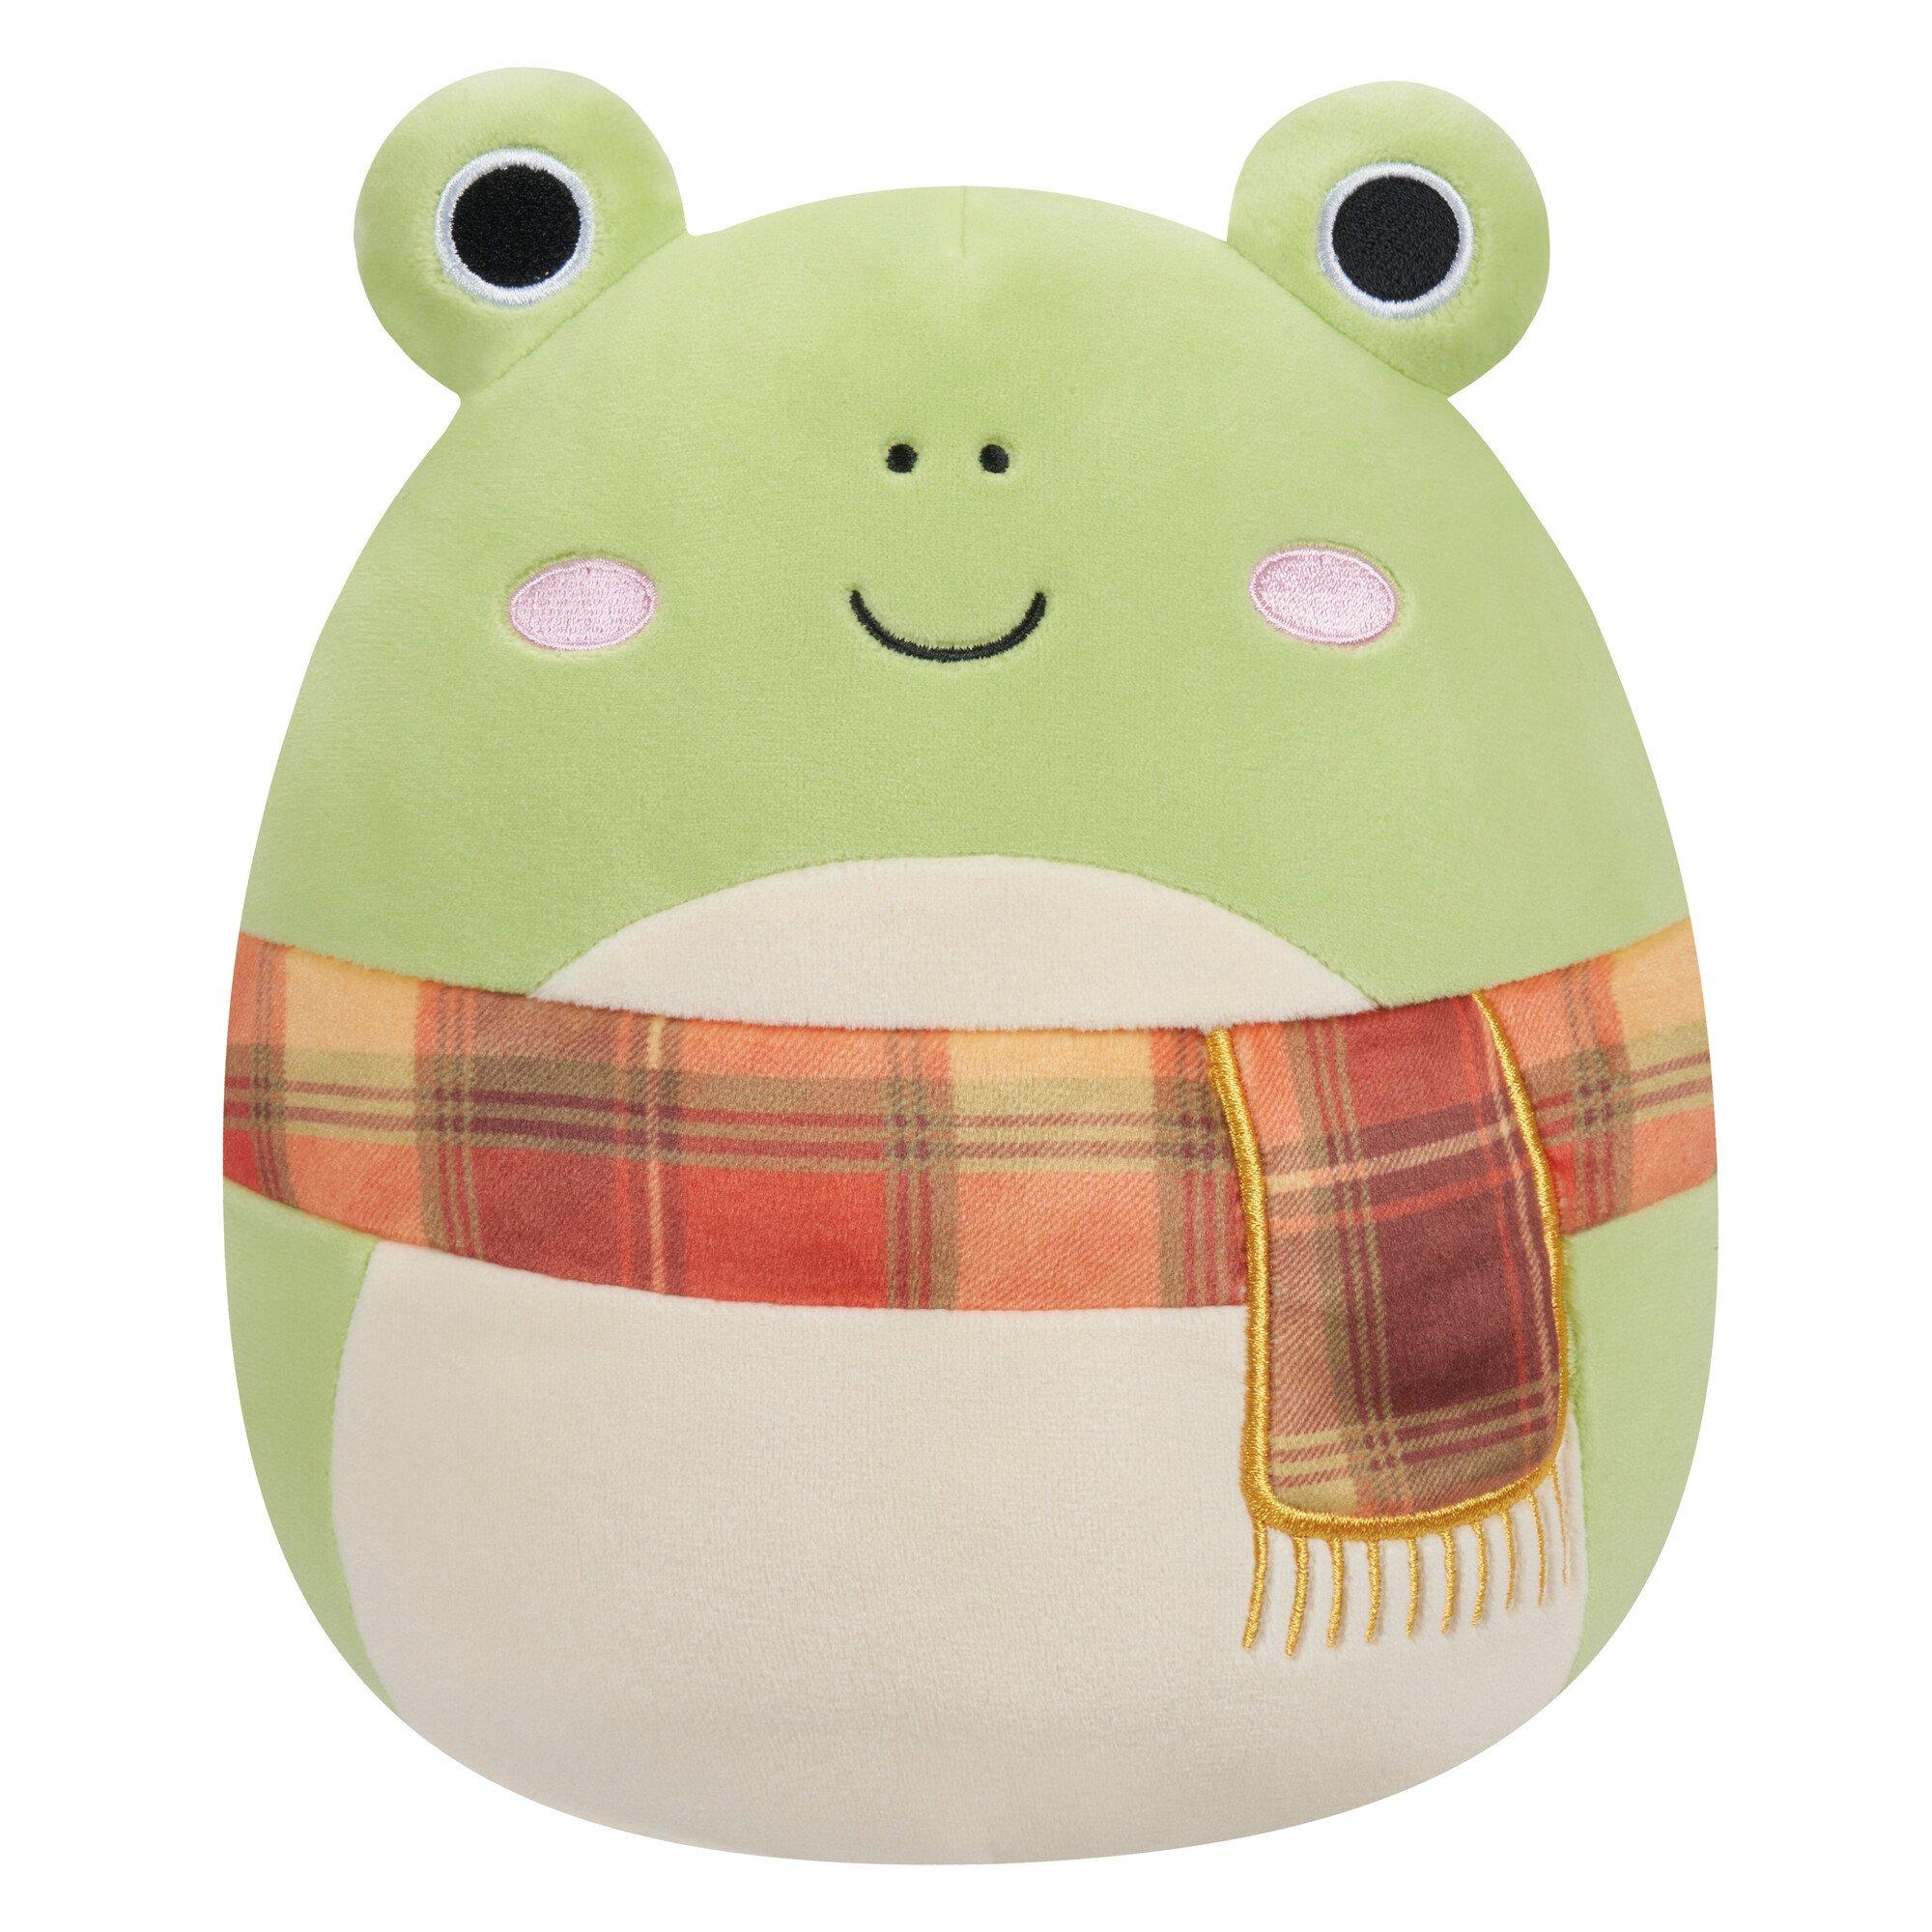 Squishmallows Core Assortment 8-in Plush (Styles May Vary)